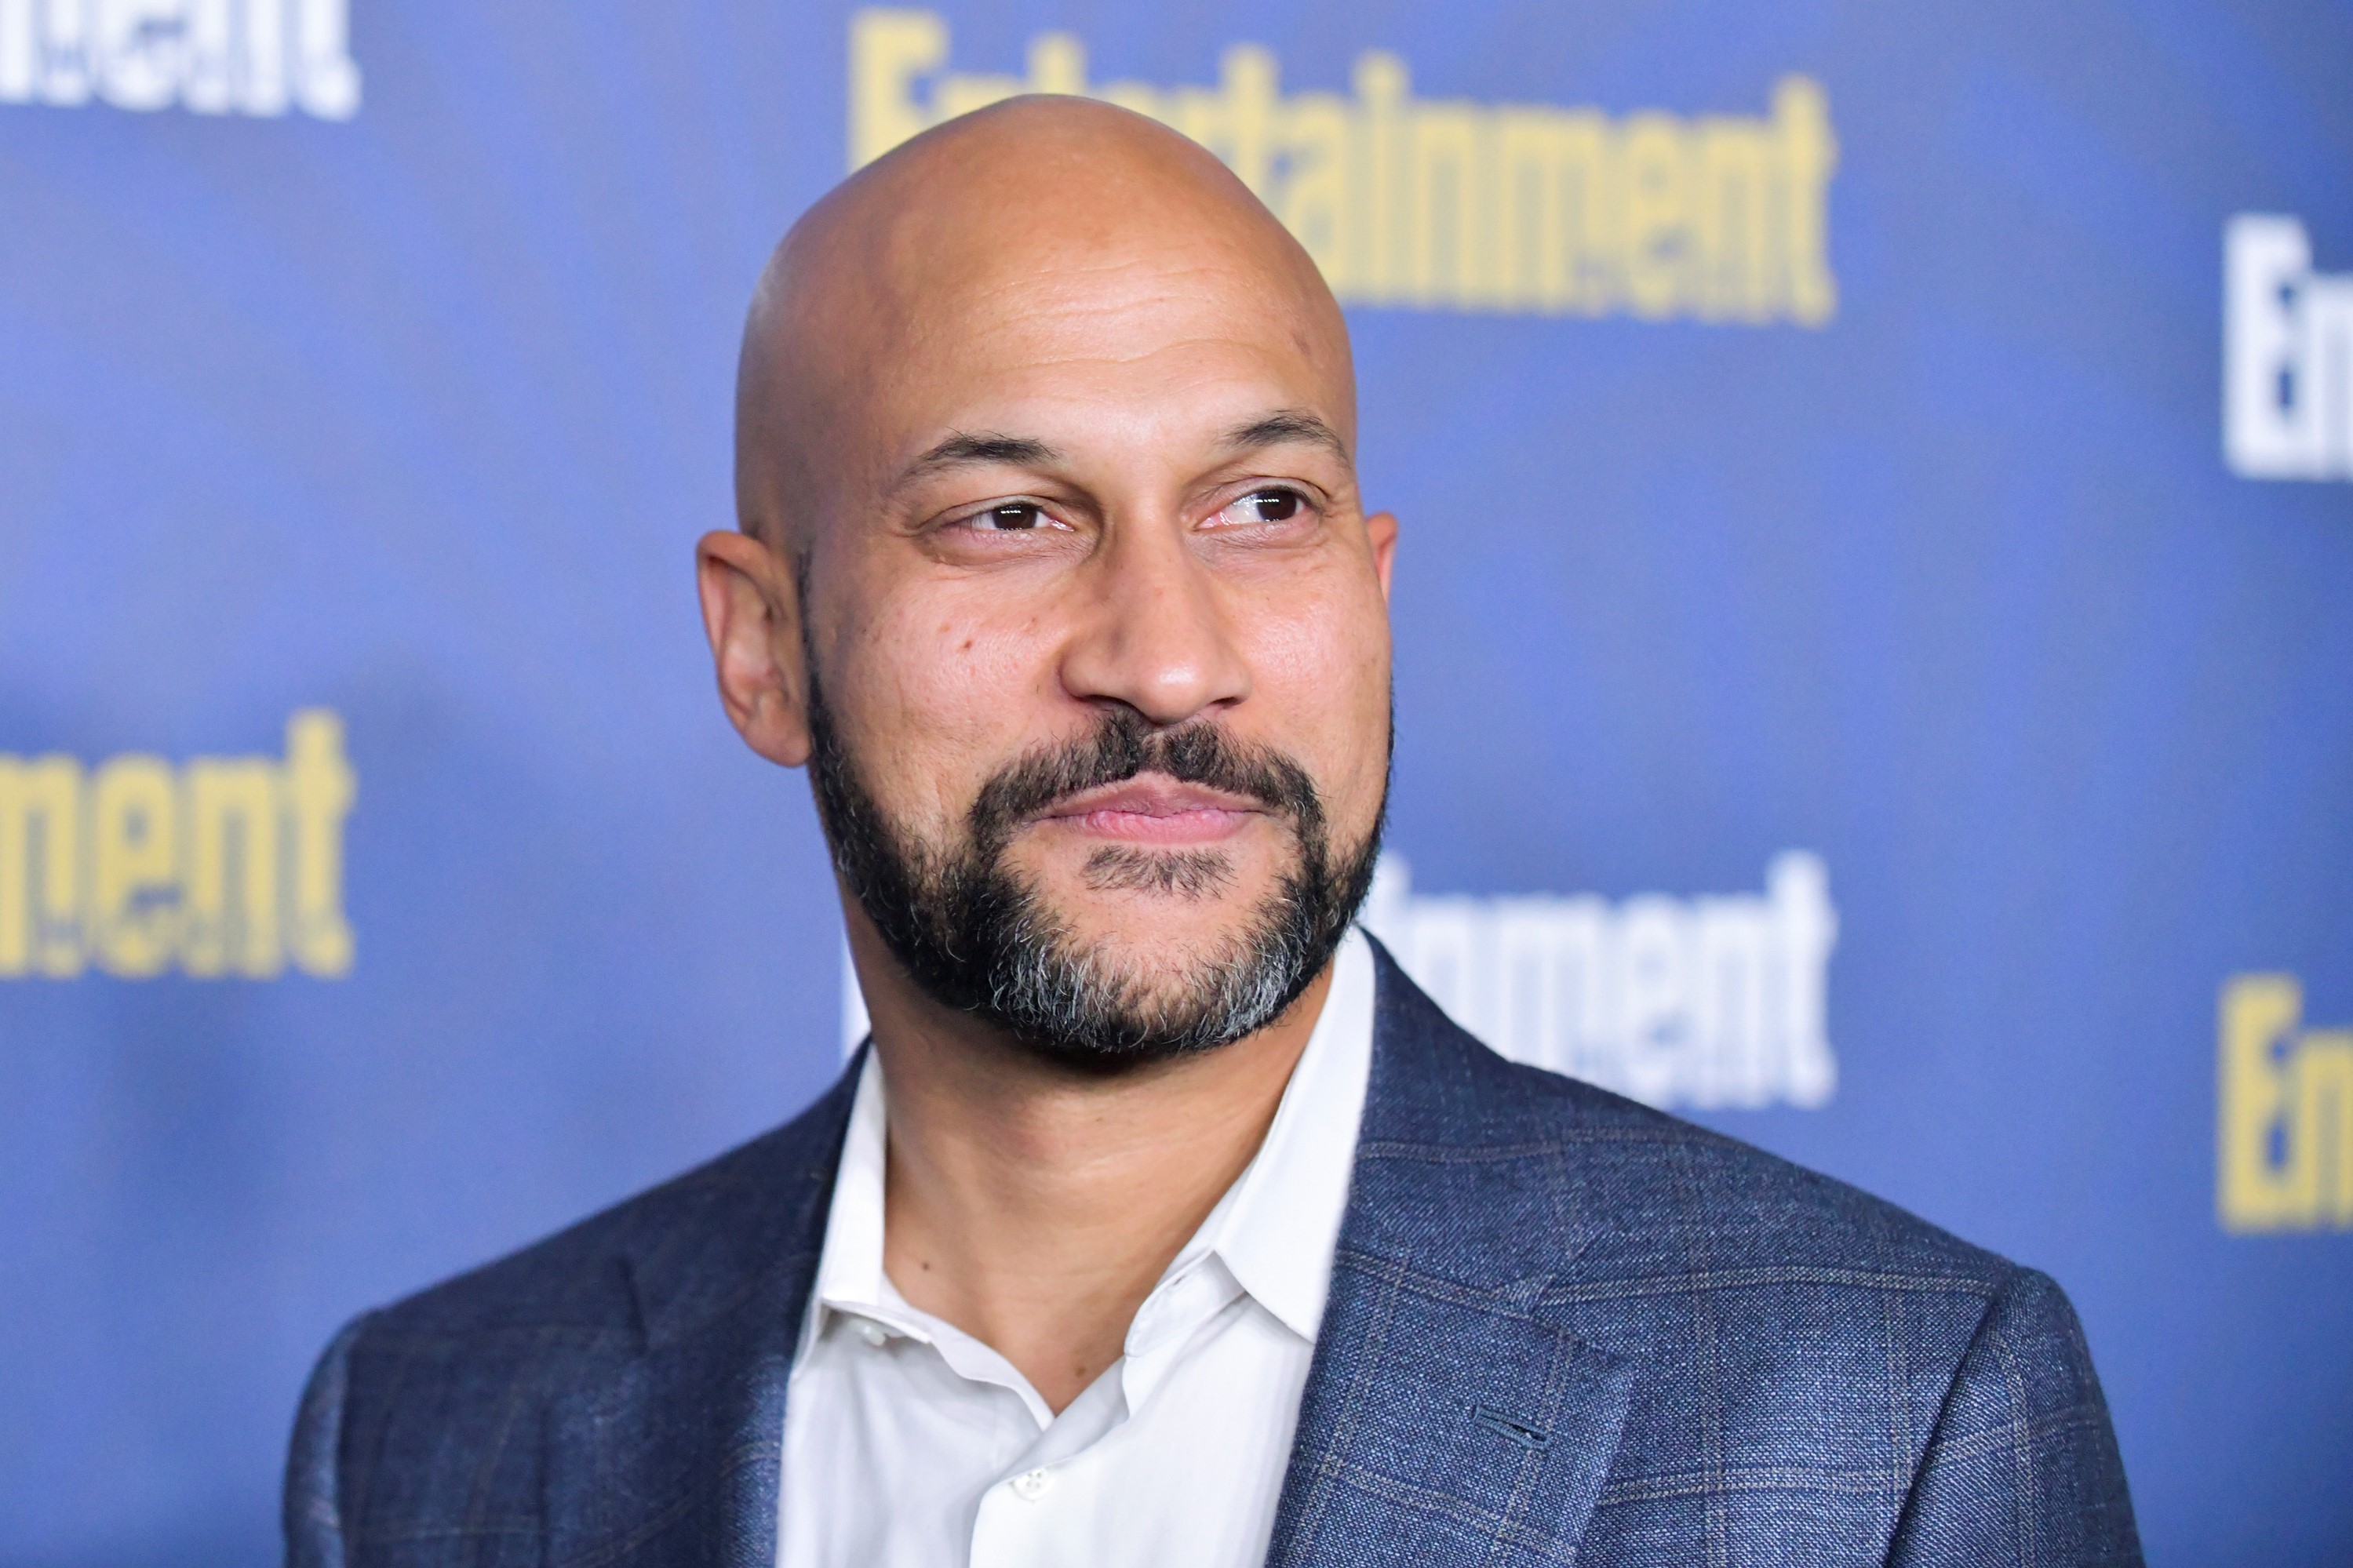 Keegan-Michael Key, in a blue jacket and white shirt, at the Entertainment Weekly Pre-SAG celebration in 2020.